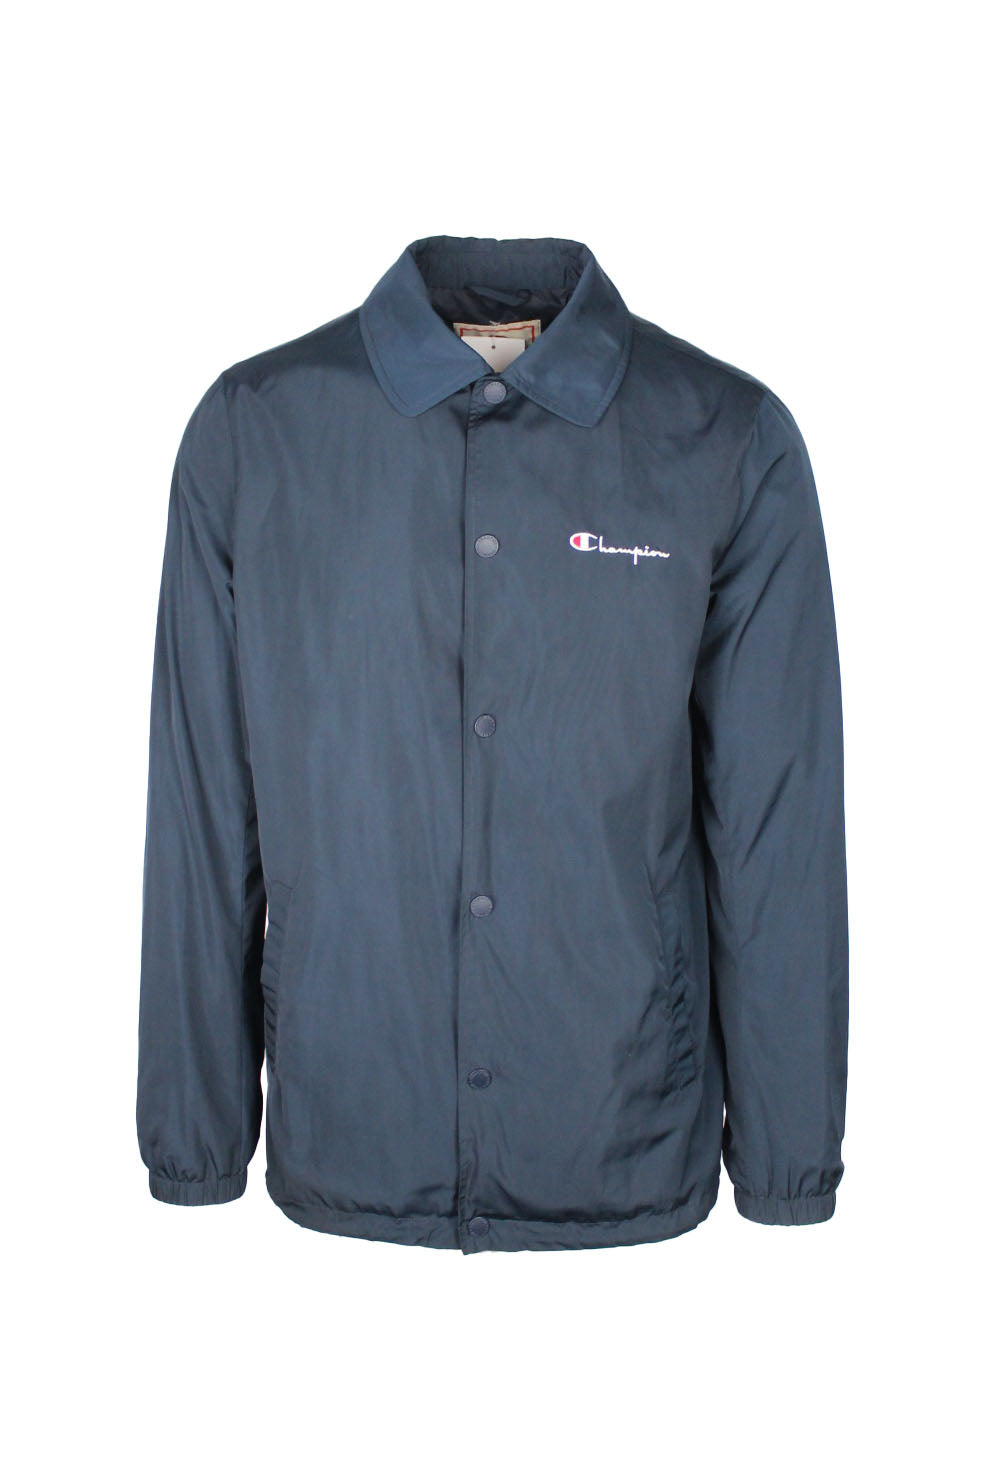 front view of champion navy snap button up coach jacket. features ‘champion’ logo embroidered at left breast, champion ‘c’ logo patch above left cuff, side hand pockets, inner velcro chest pocket, fully lined, elastic at cuffs, and drawstring at hem.